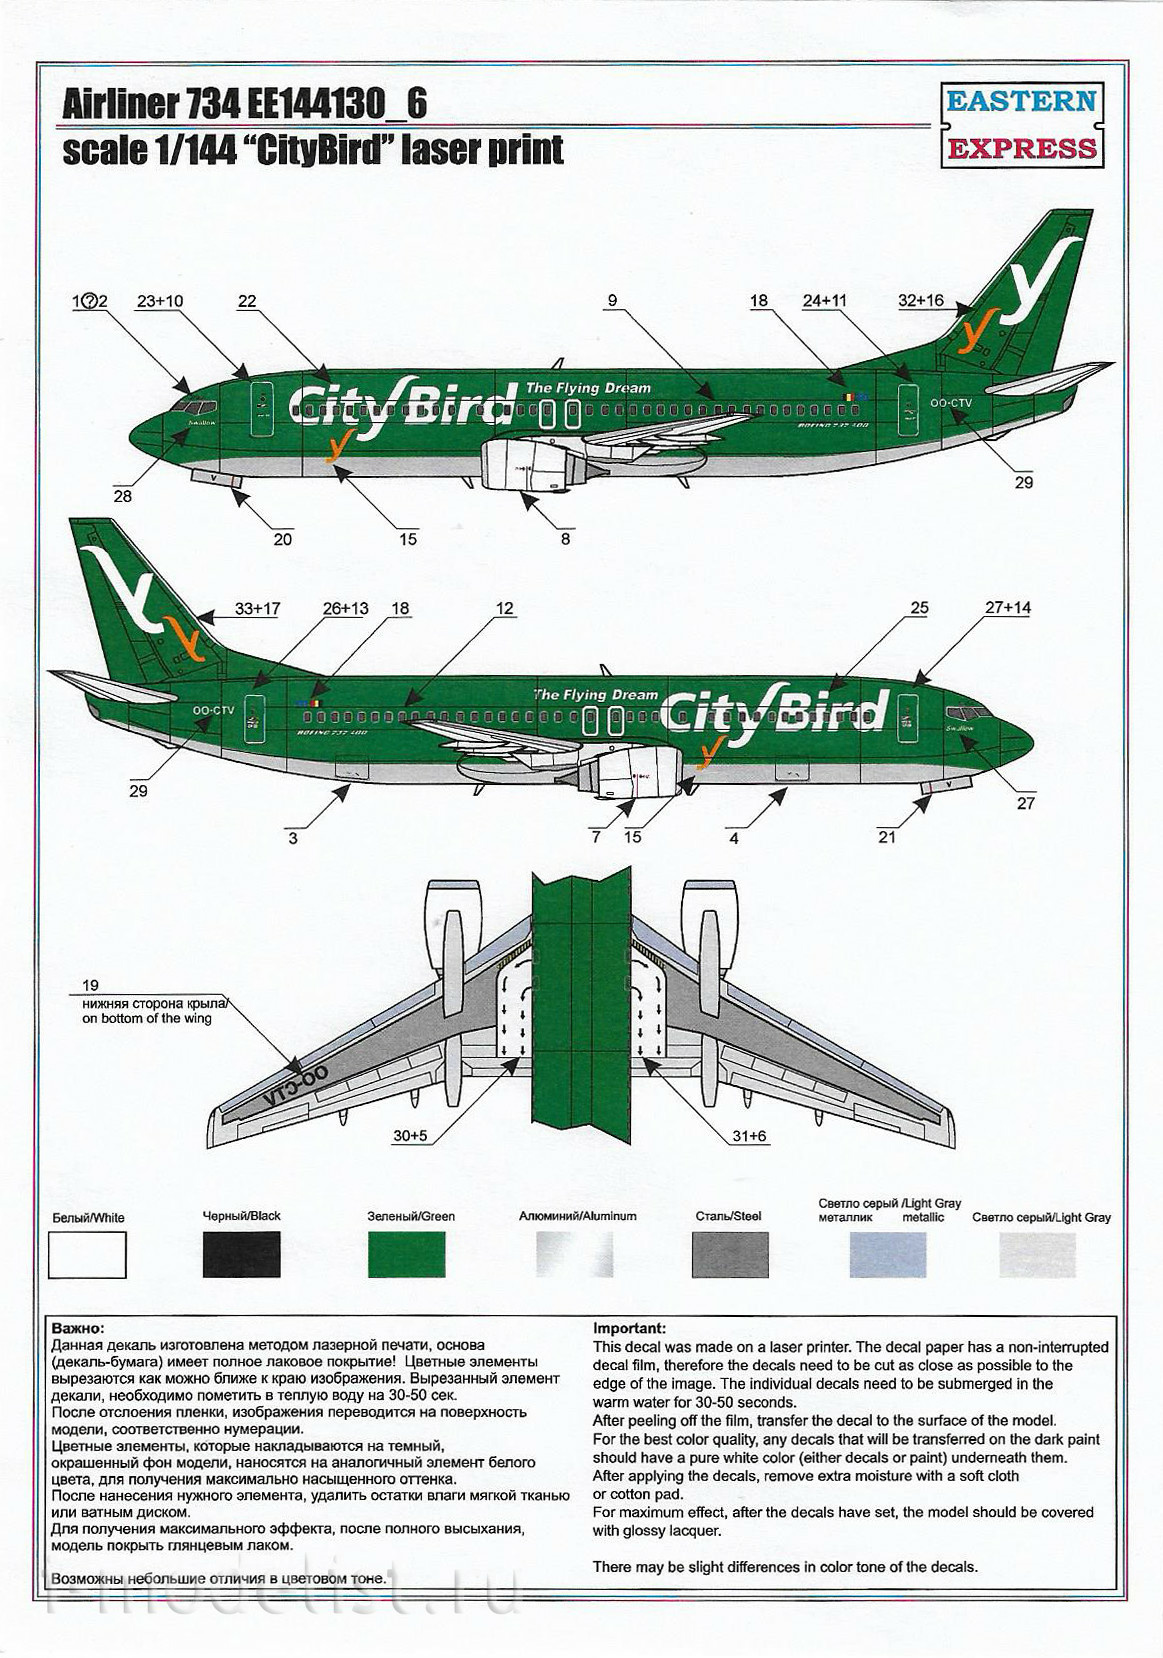 144130-6 Eastern Express 1/144 scales Airliner 737-400 CityBird